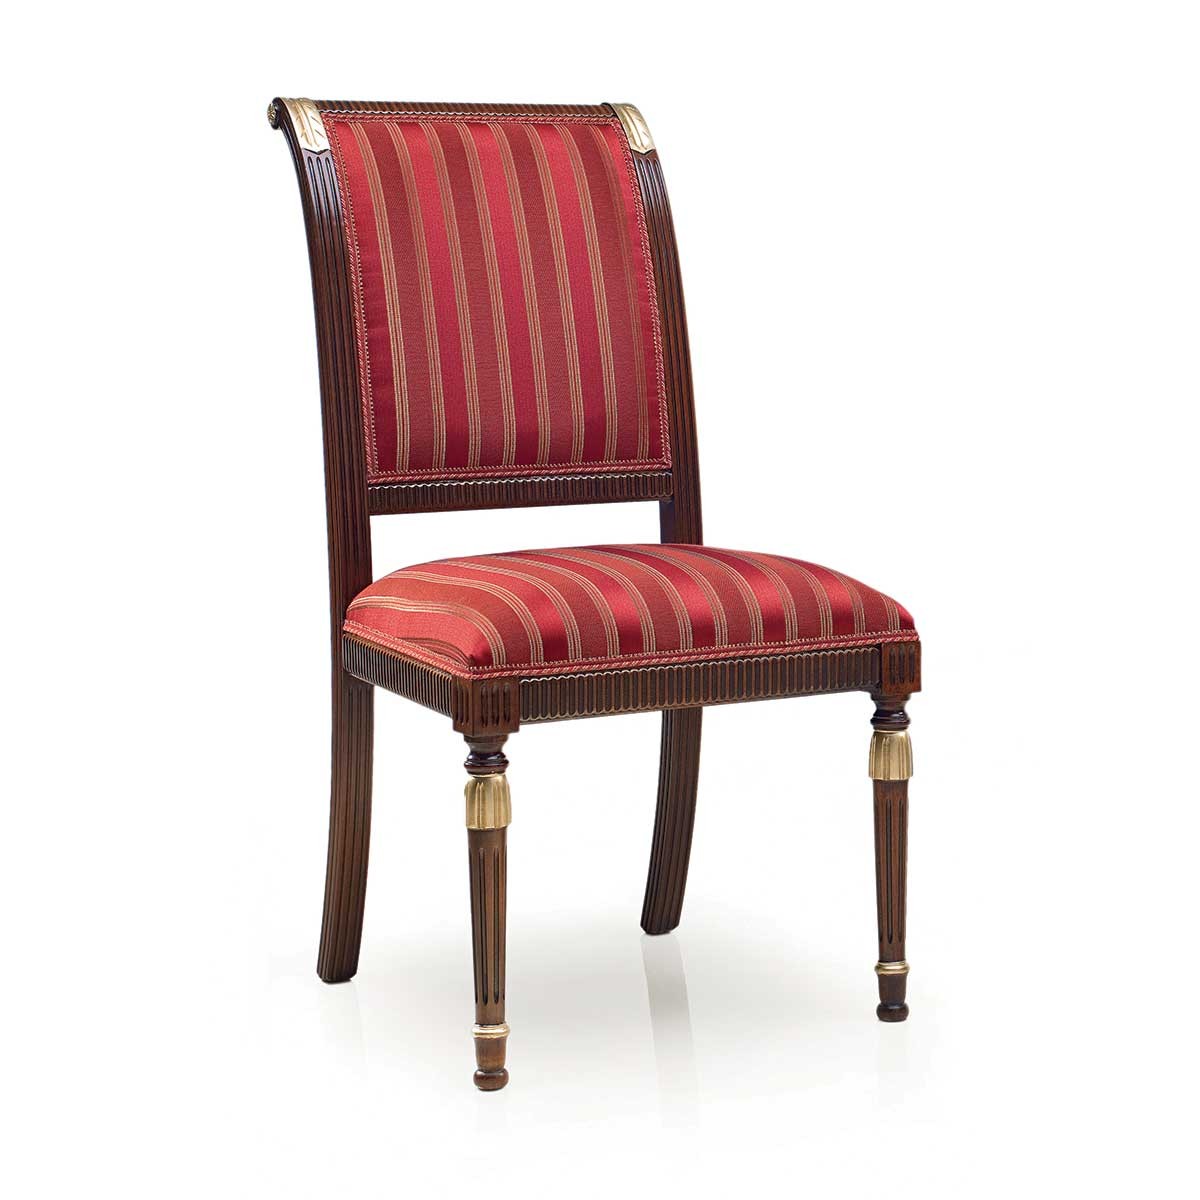 Red upholstered classic chair MAGISTRA by Sevensedie in empire style